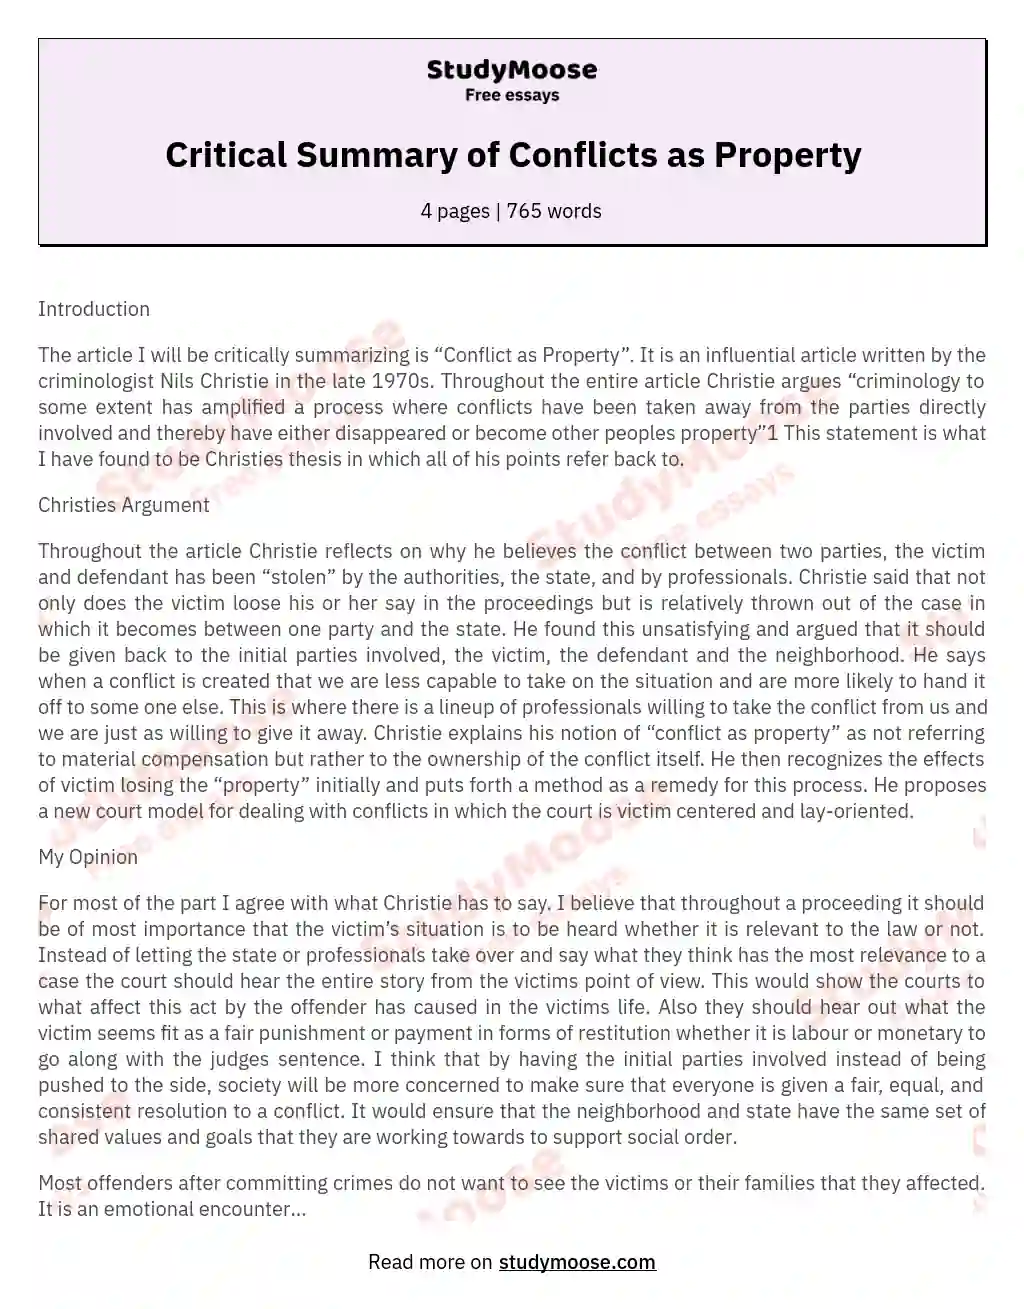 Critical Summary of Conflicts as Property essay